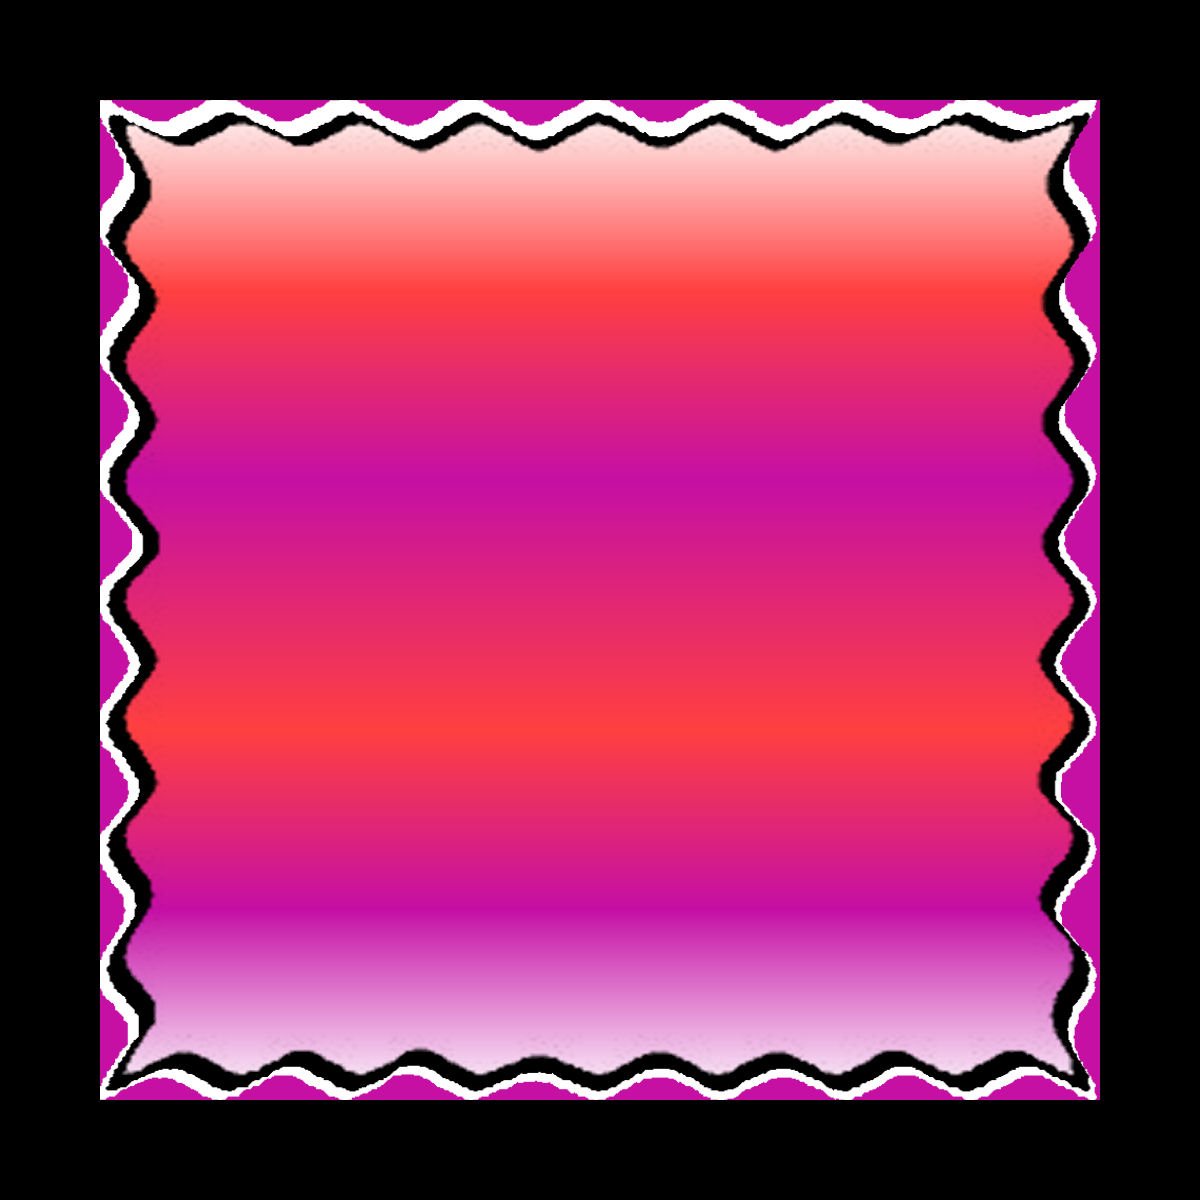 the border is pink and purple with white